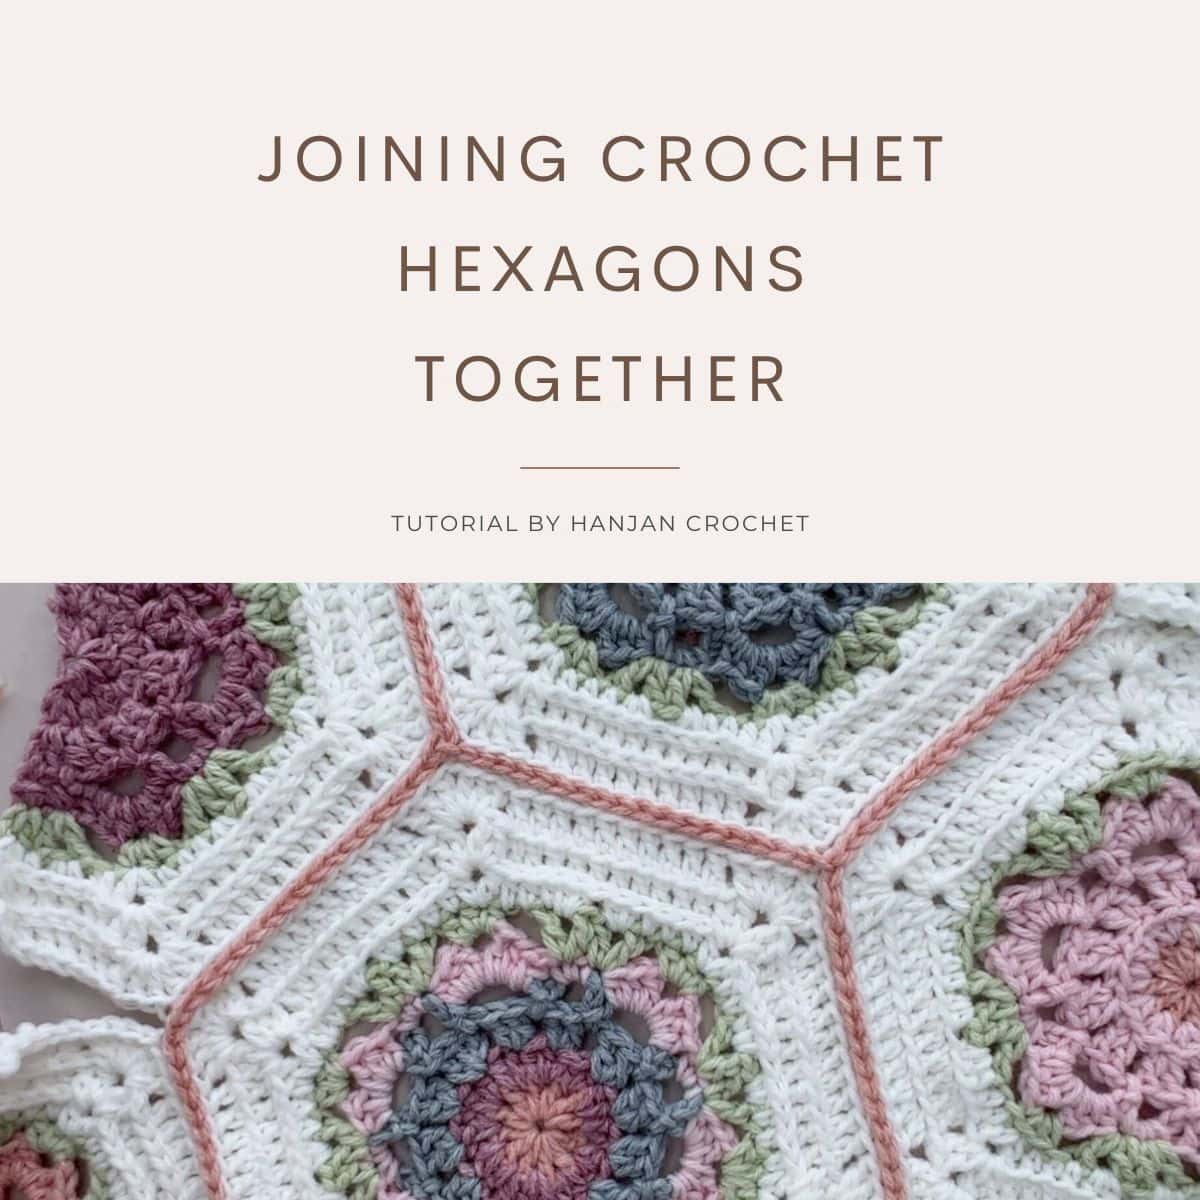 Joining Crochet Hexagons Together